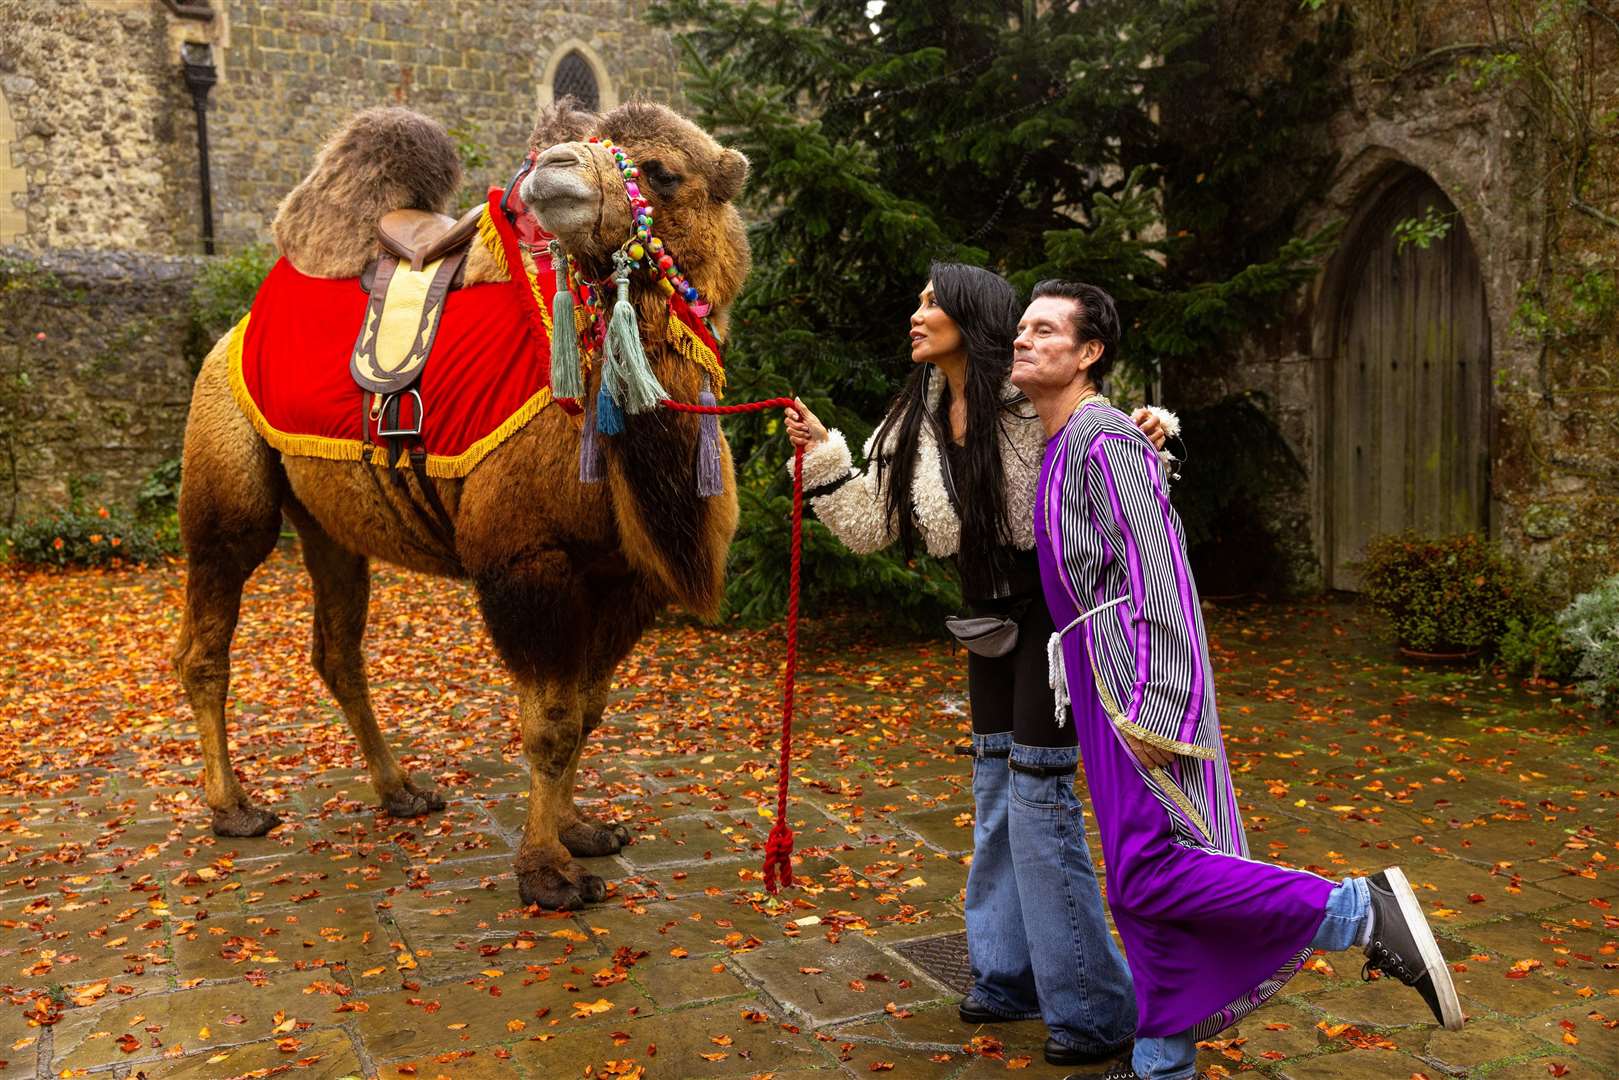 The nativity parade in the village of Lympne, near Hythe, will feature camels, sheep and donkeys. Picture: Barret Kaplan